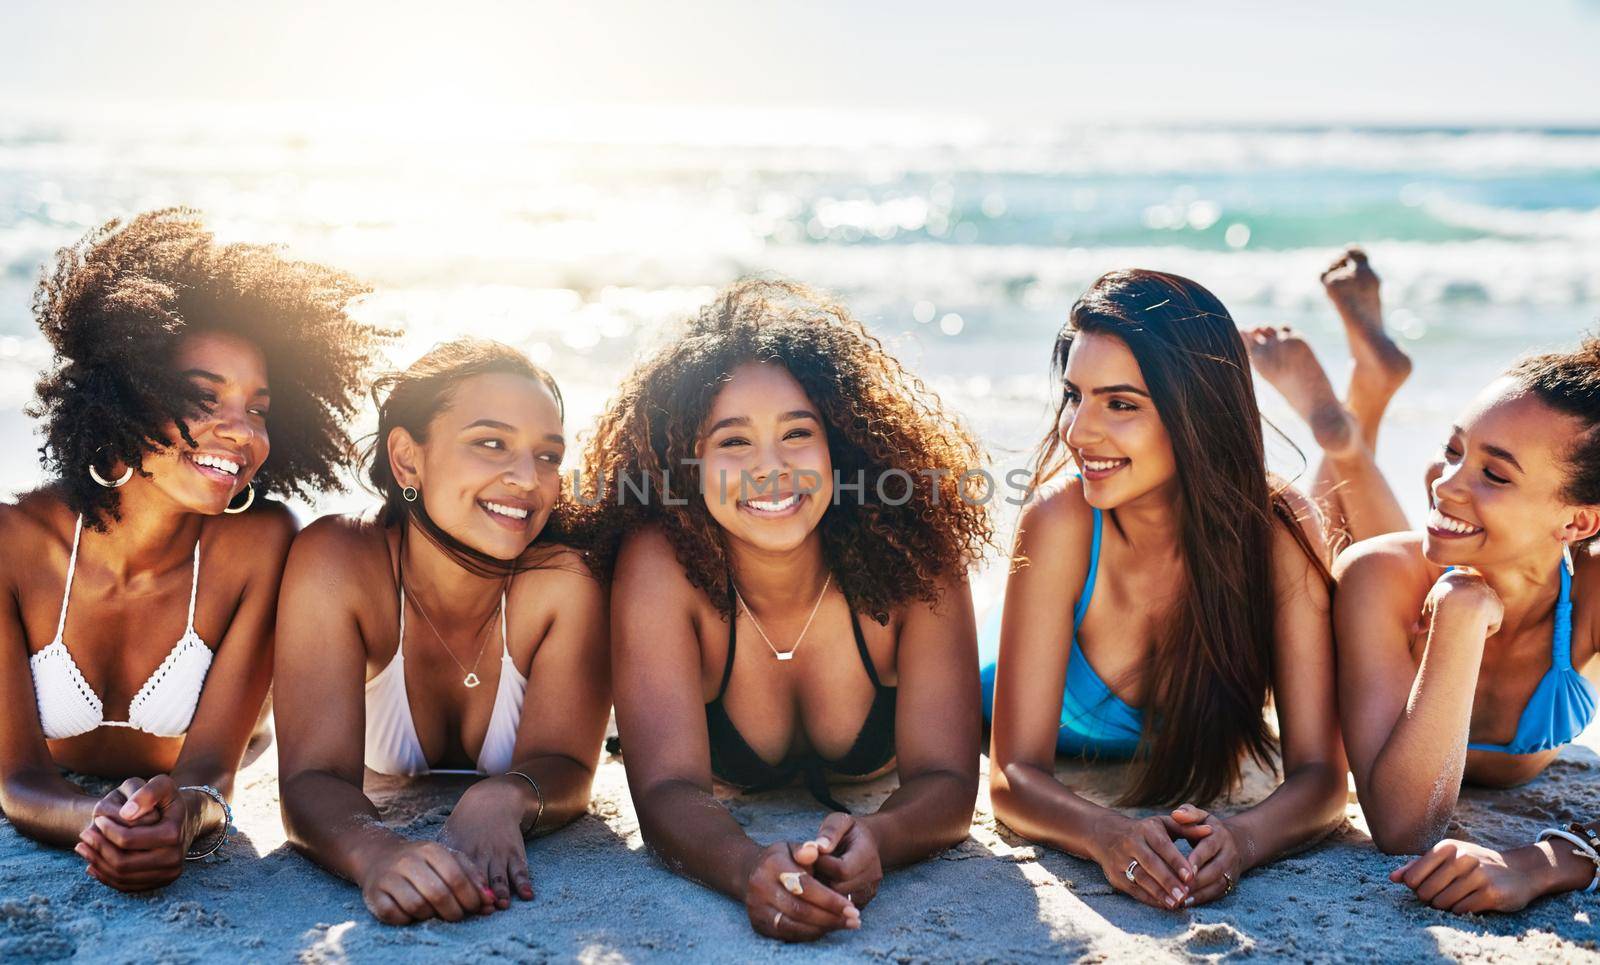 Nothing inspires happiness like a beachy day with best friends. Portrait of a group of happy young women relaxing together at the beach. by YuriArcurs